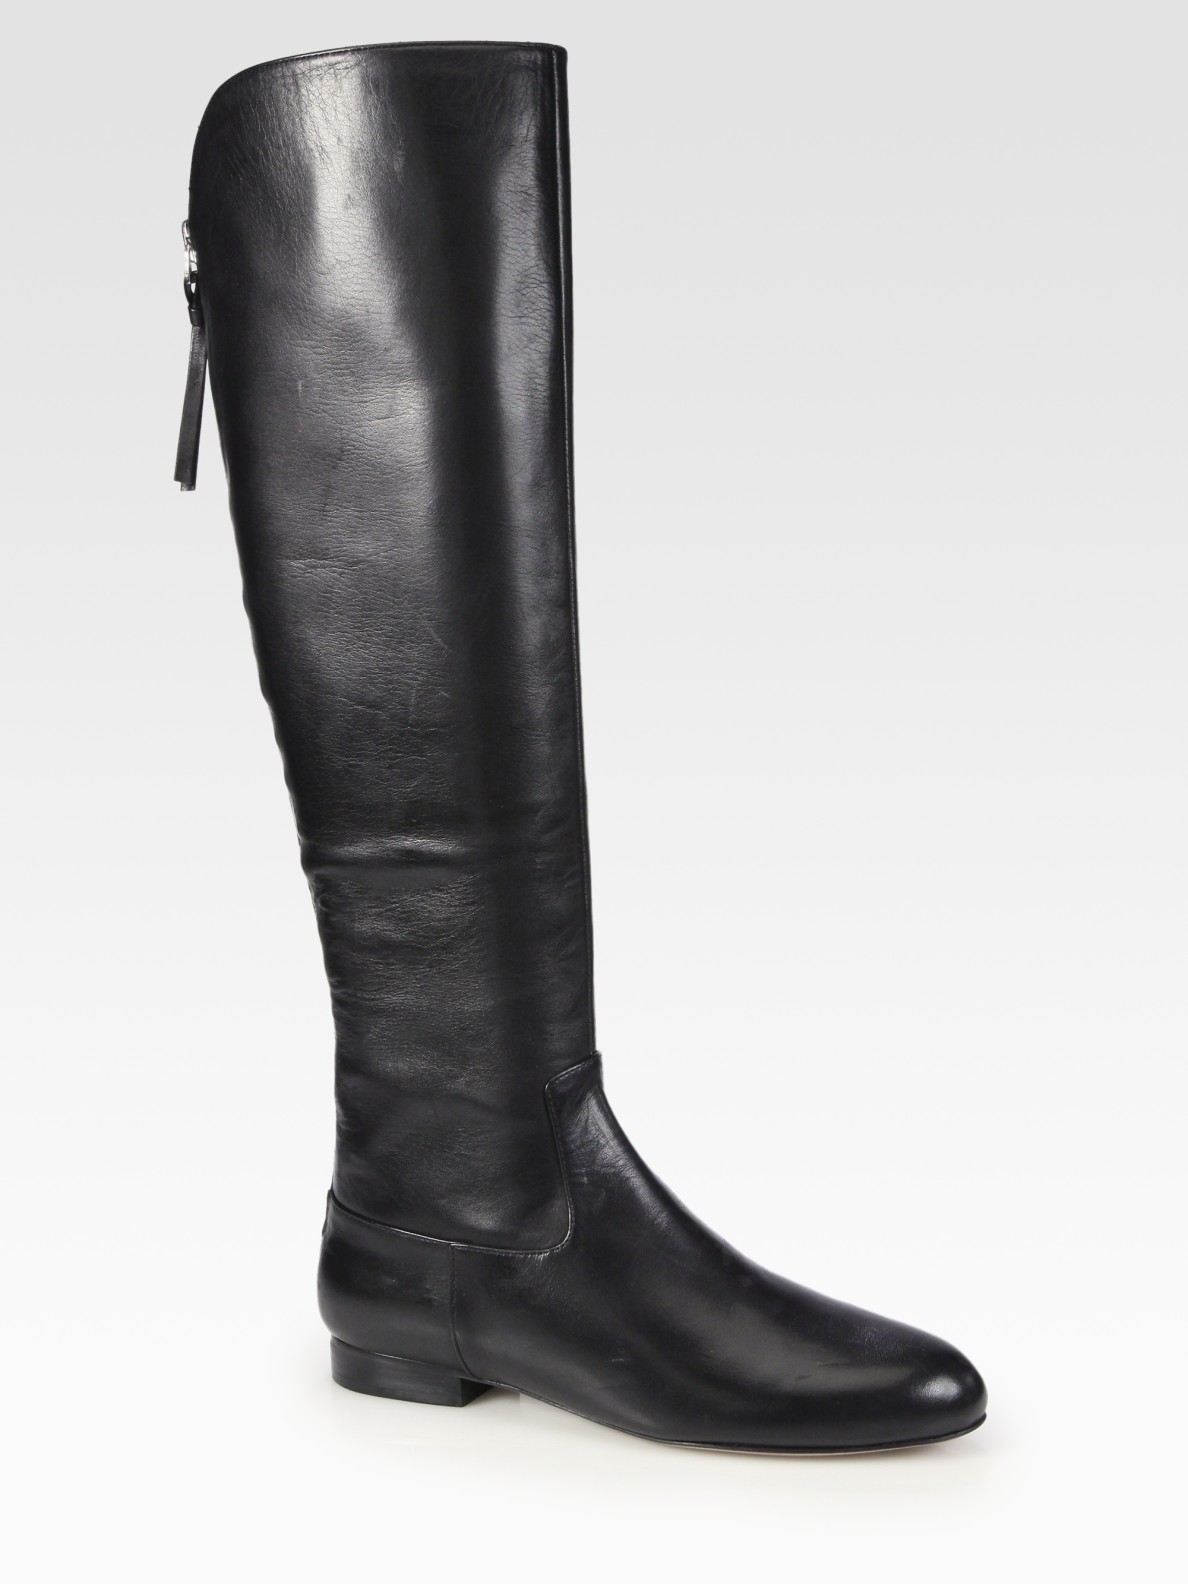 Lyst - Elie Tahari Riley Leather Boots in Black